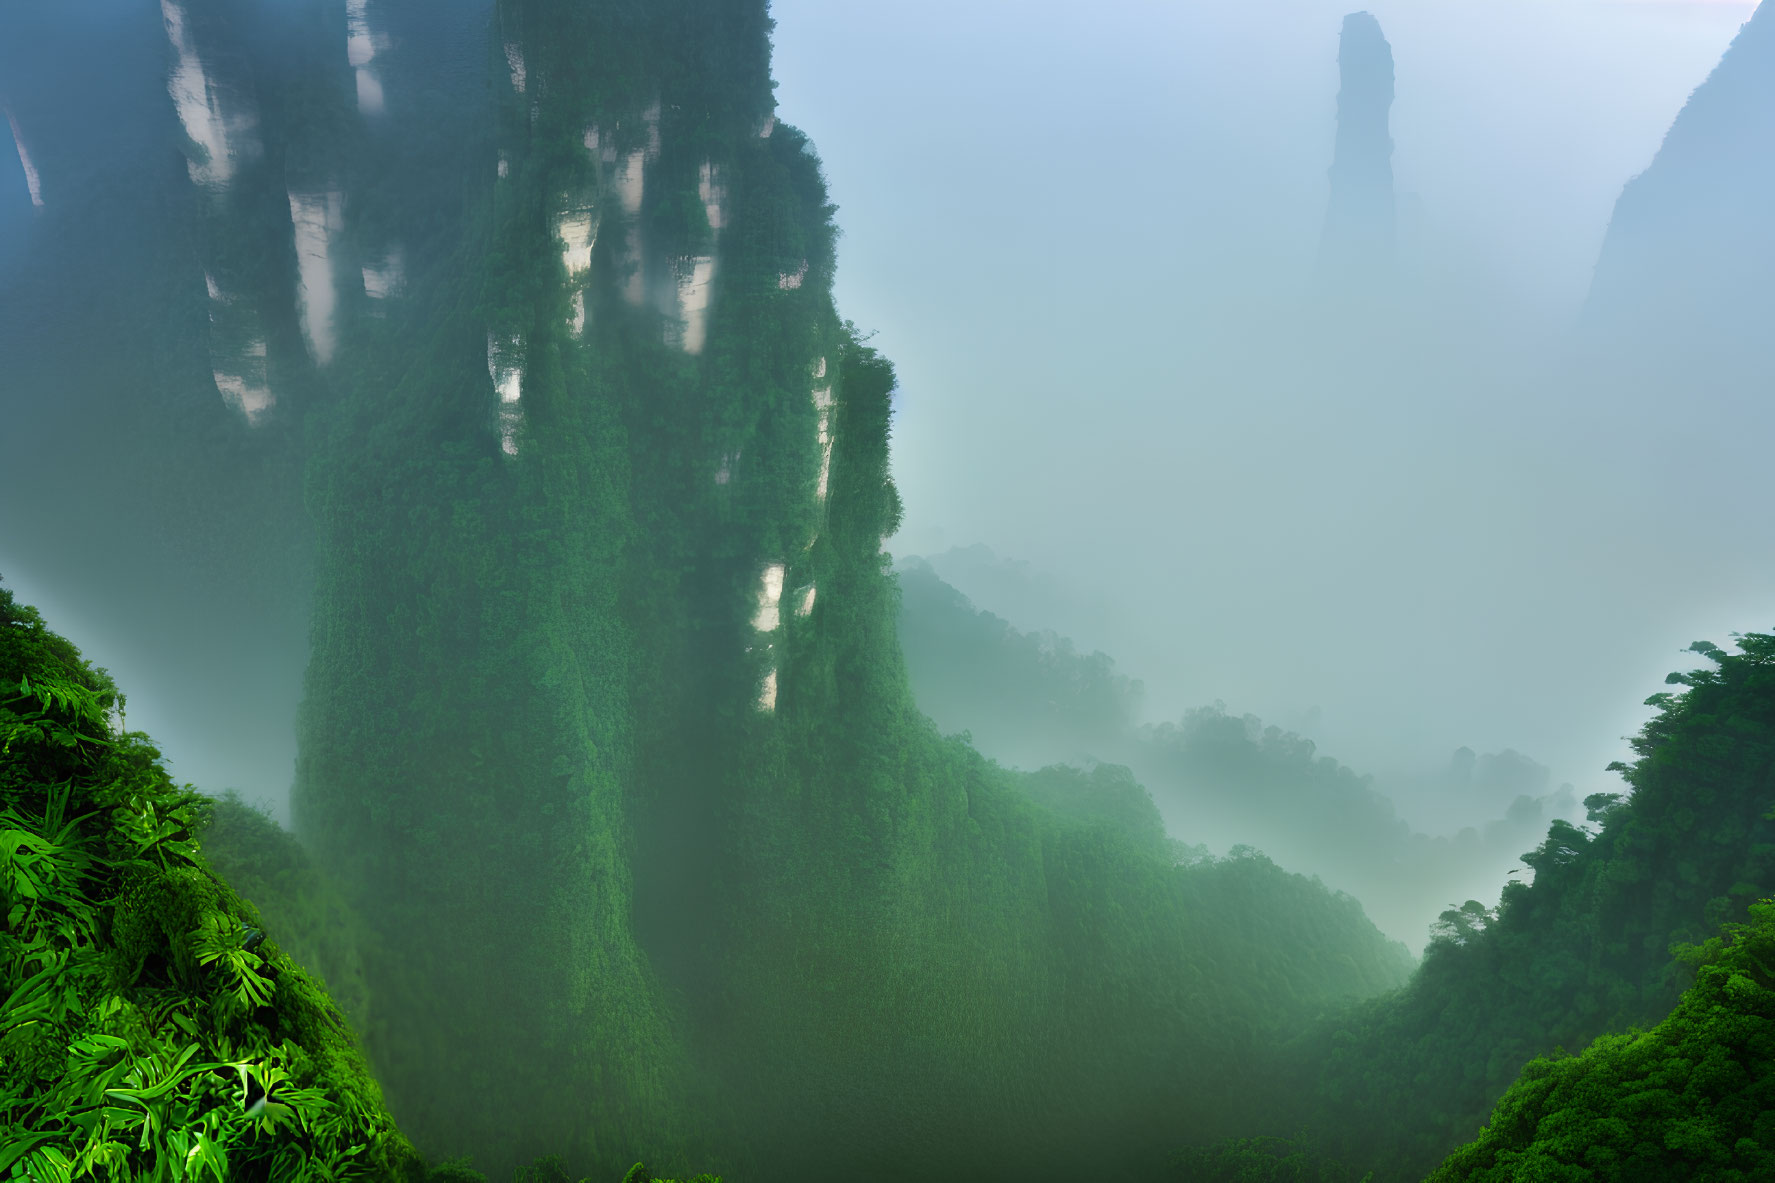 Misty green mountains with dense foliage and hazy sky